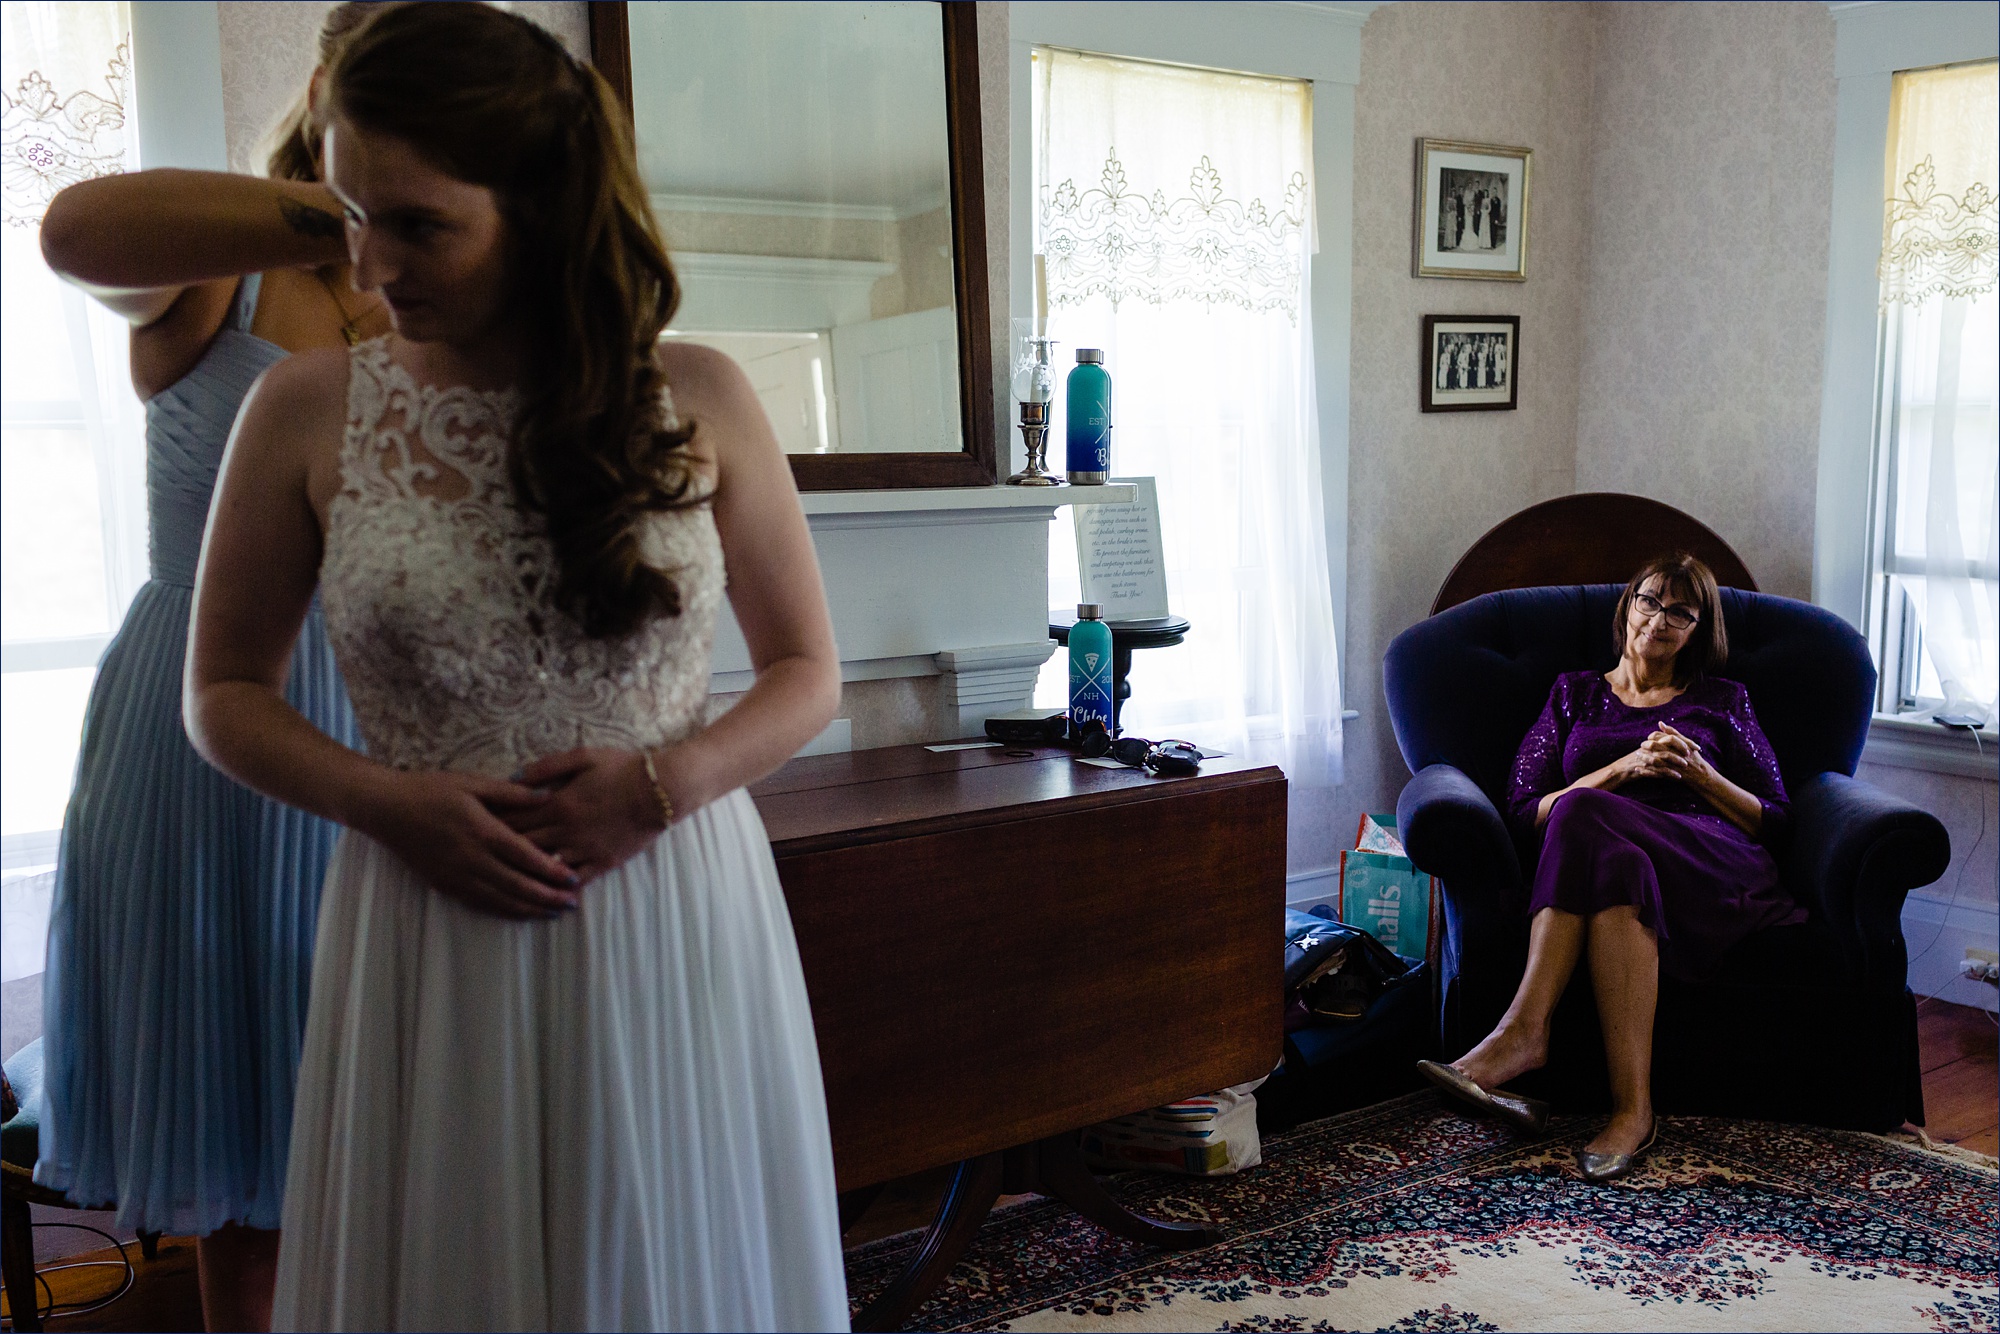 Mother of the groom watches as the bride gets the final touches on her wedding day attire